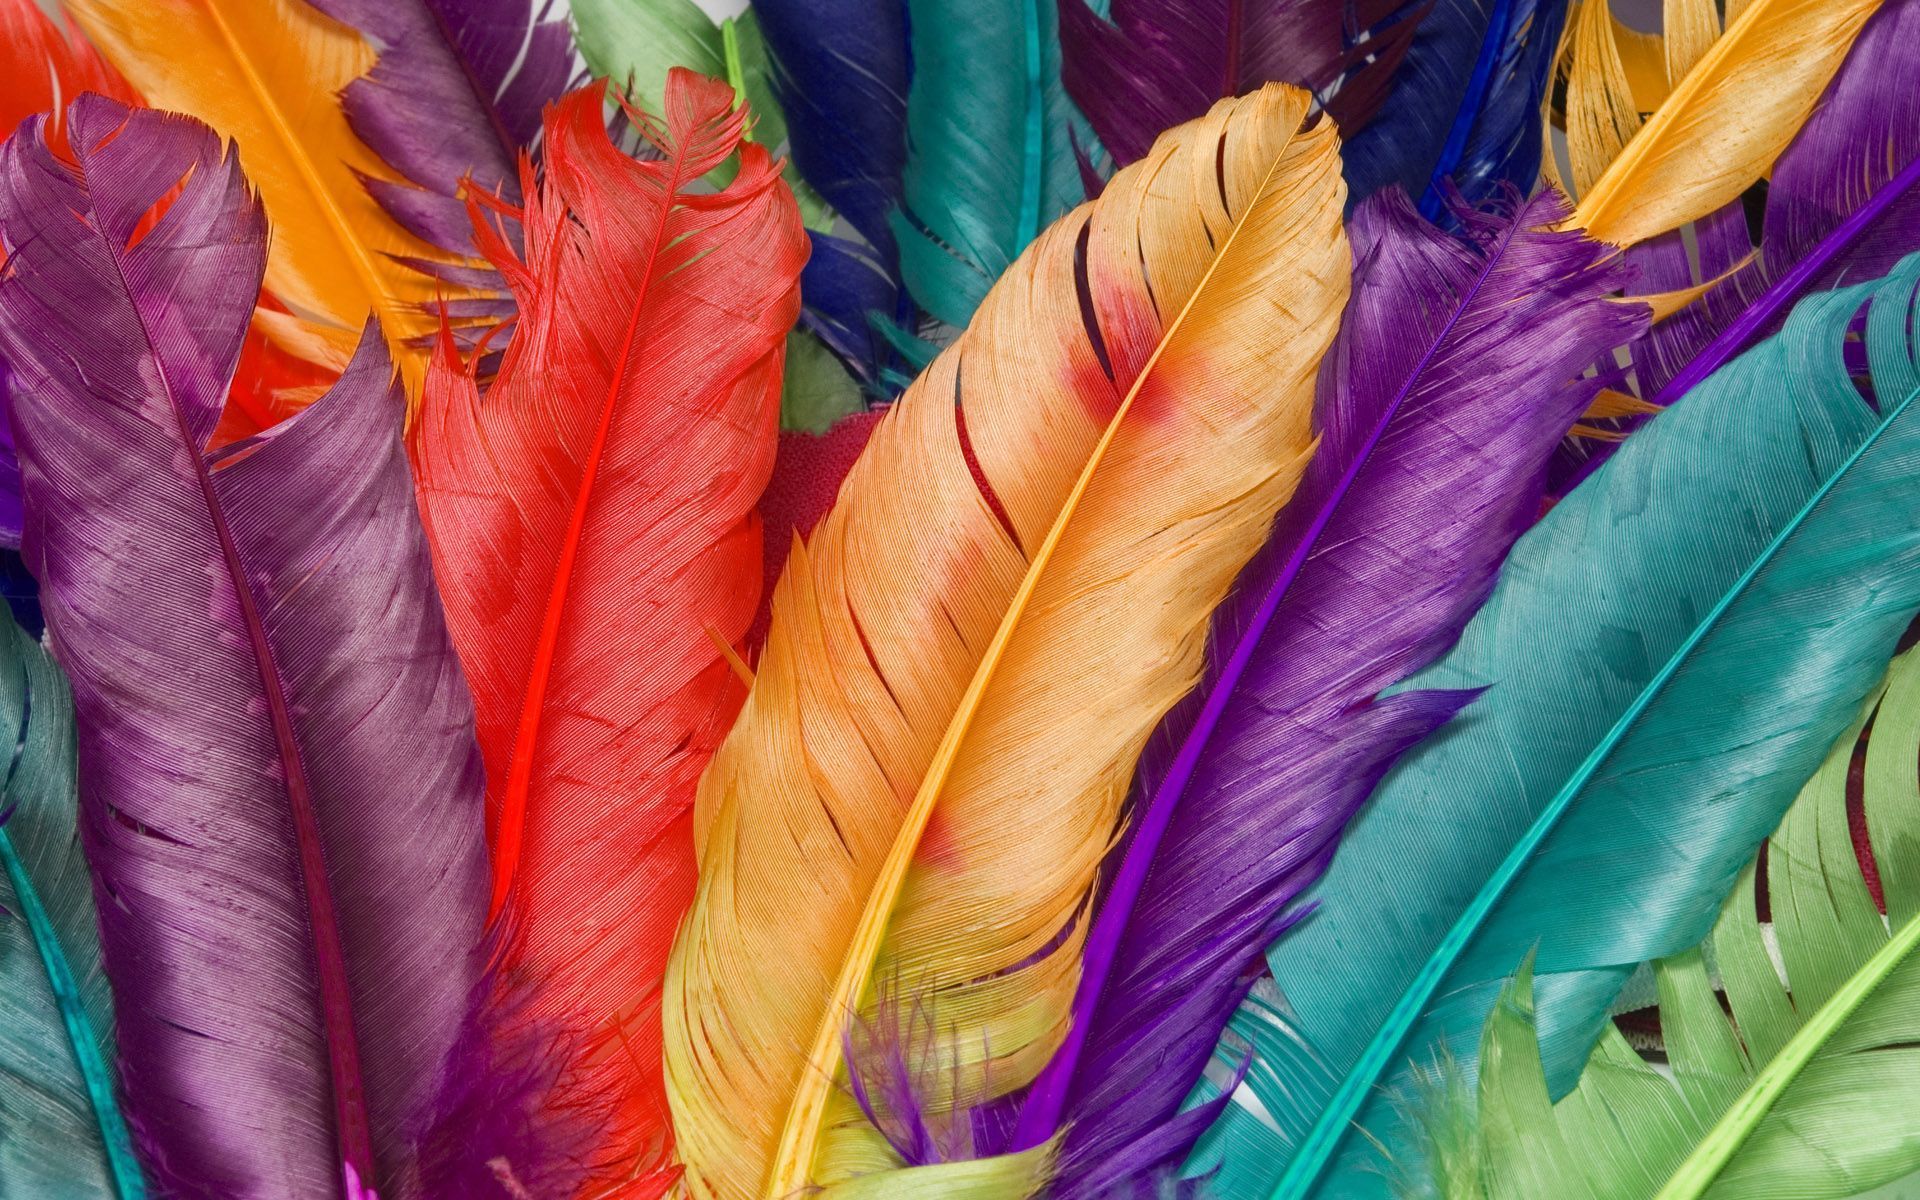 Feather Desktop Wallpaper, Feather Images Free, New Wallpapers